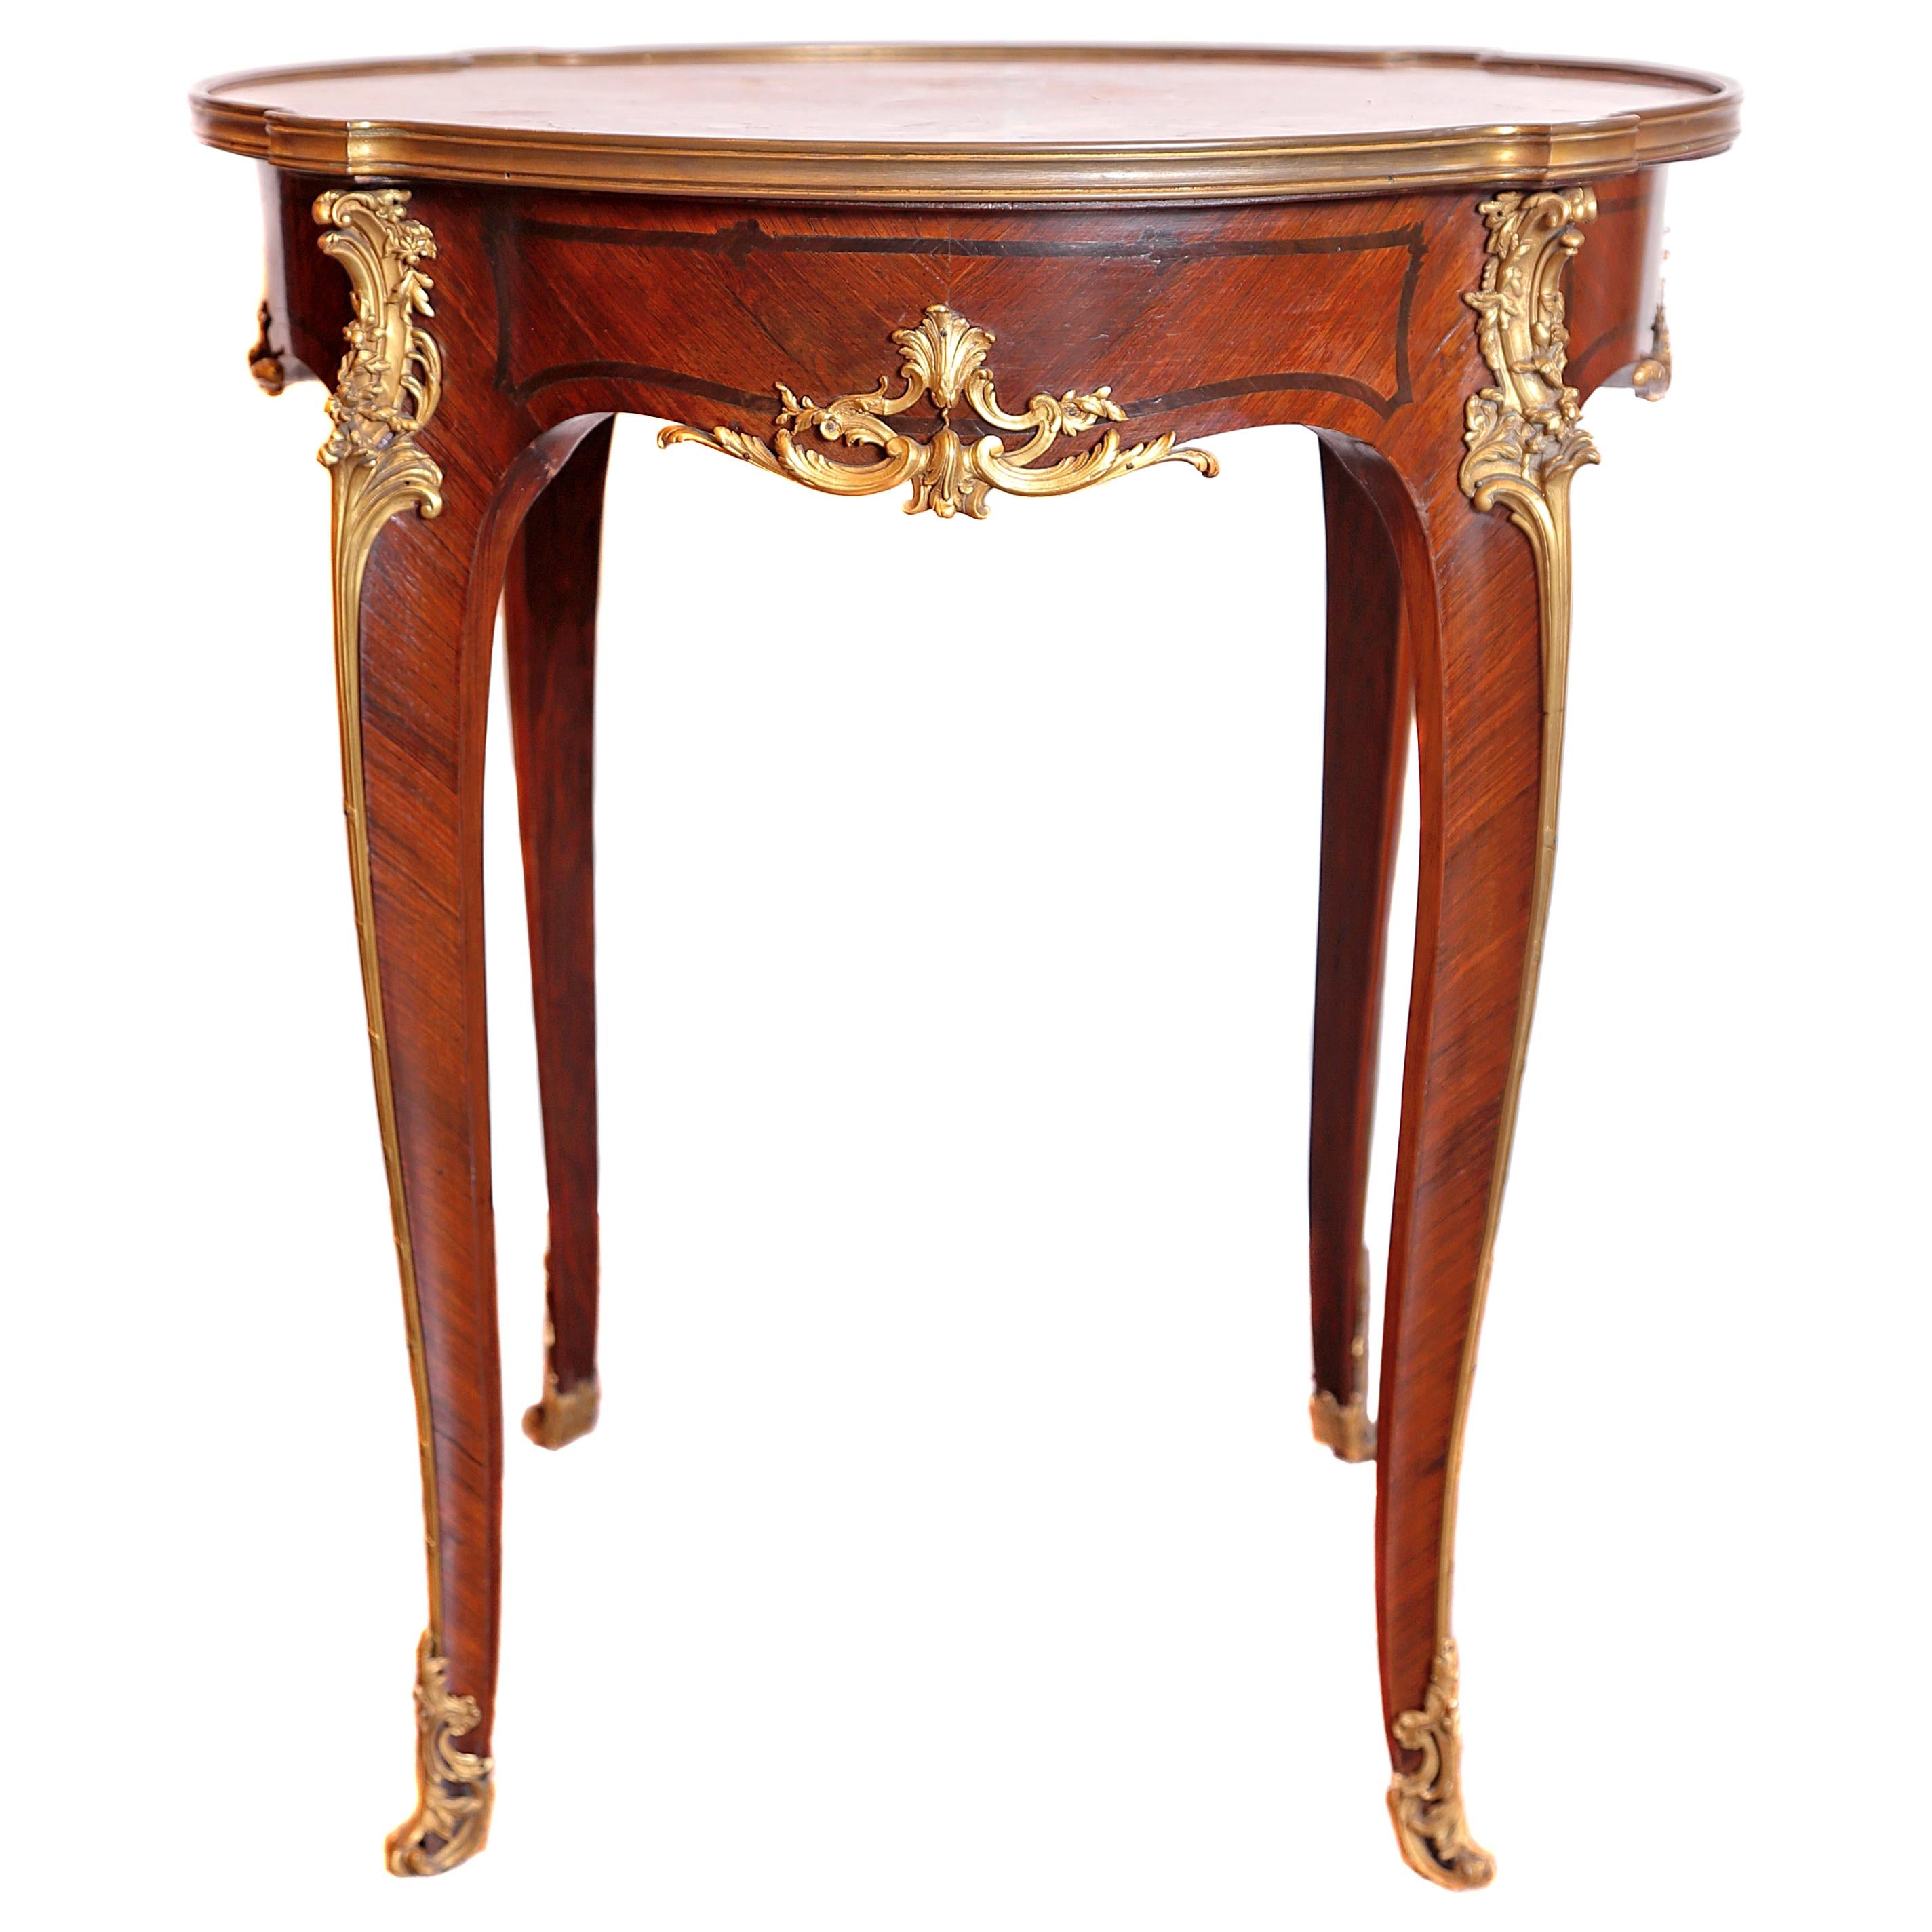 19th Century French Louis XV Mahogany and Gilt Bronze and Marble-Top Table